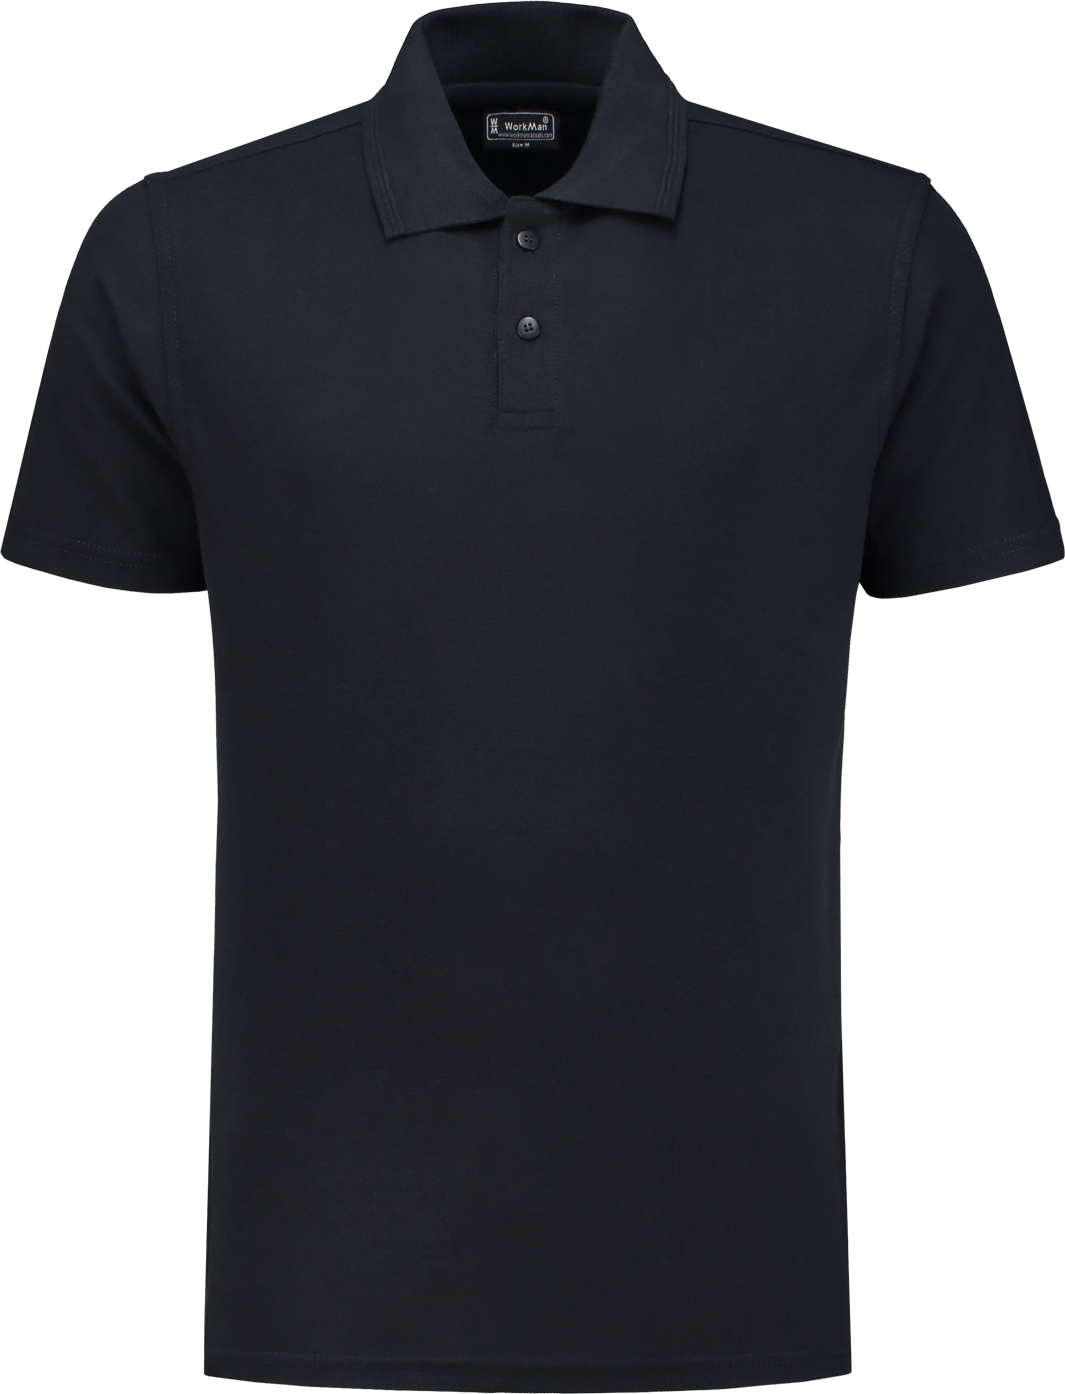 10.6.8102.00 8102 Poloshirt Outfitters Navy XS